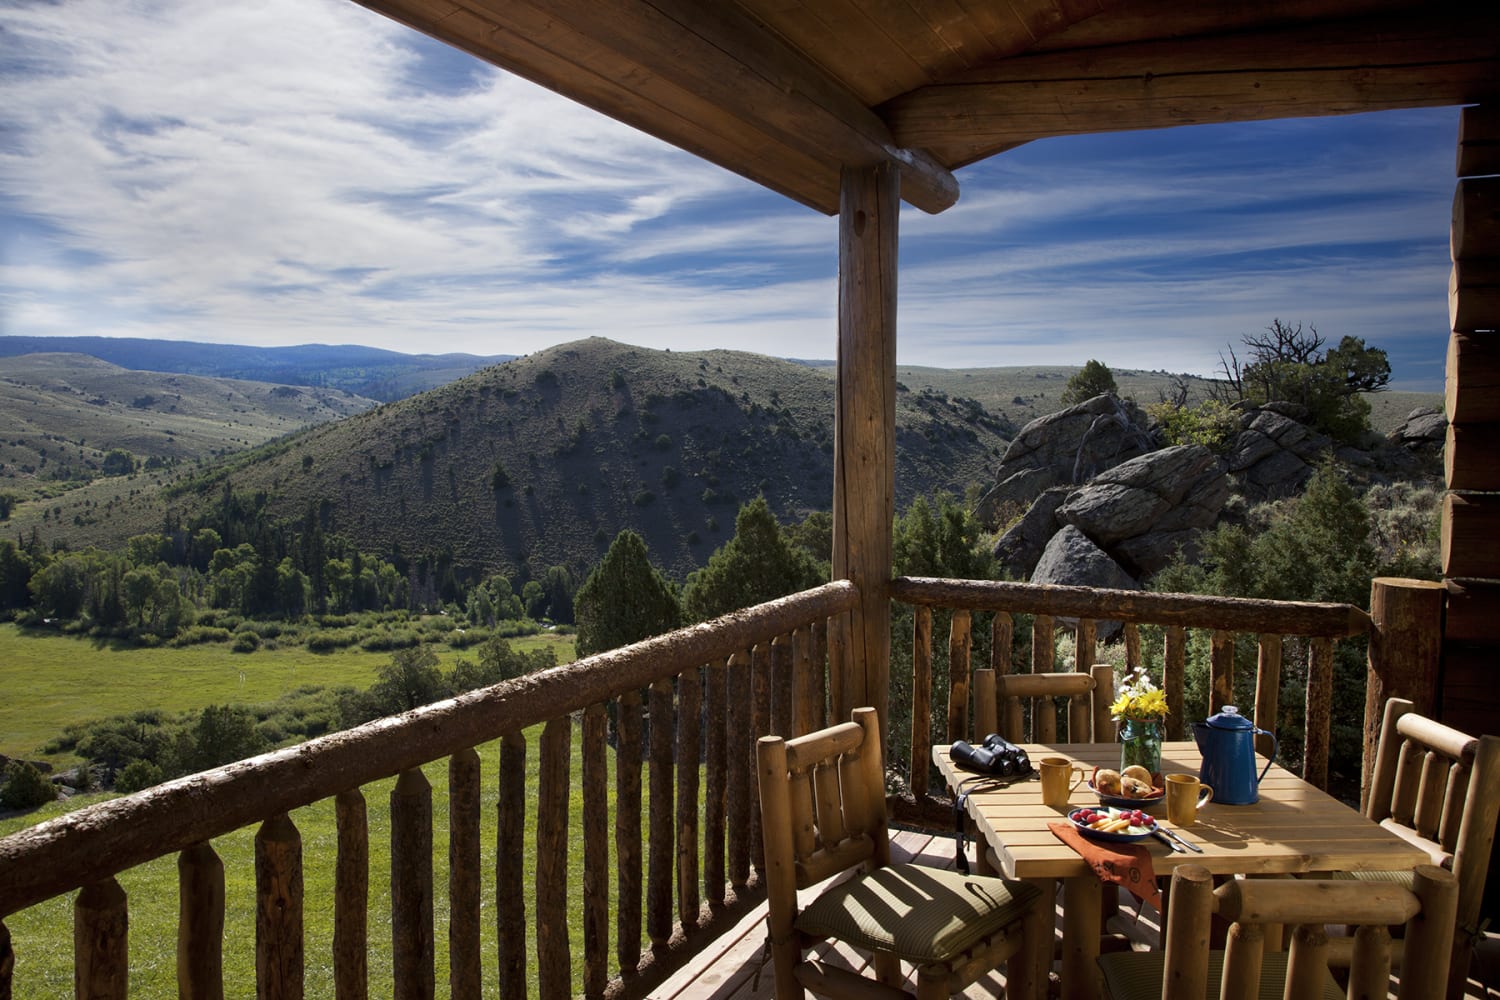 13 of the best romantic getaways in the United States